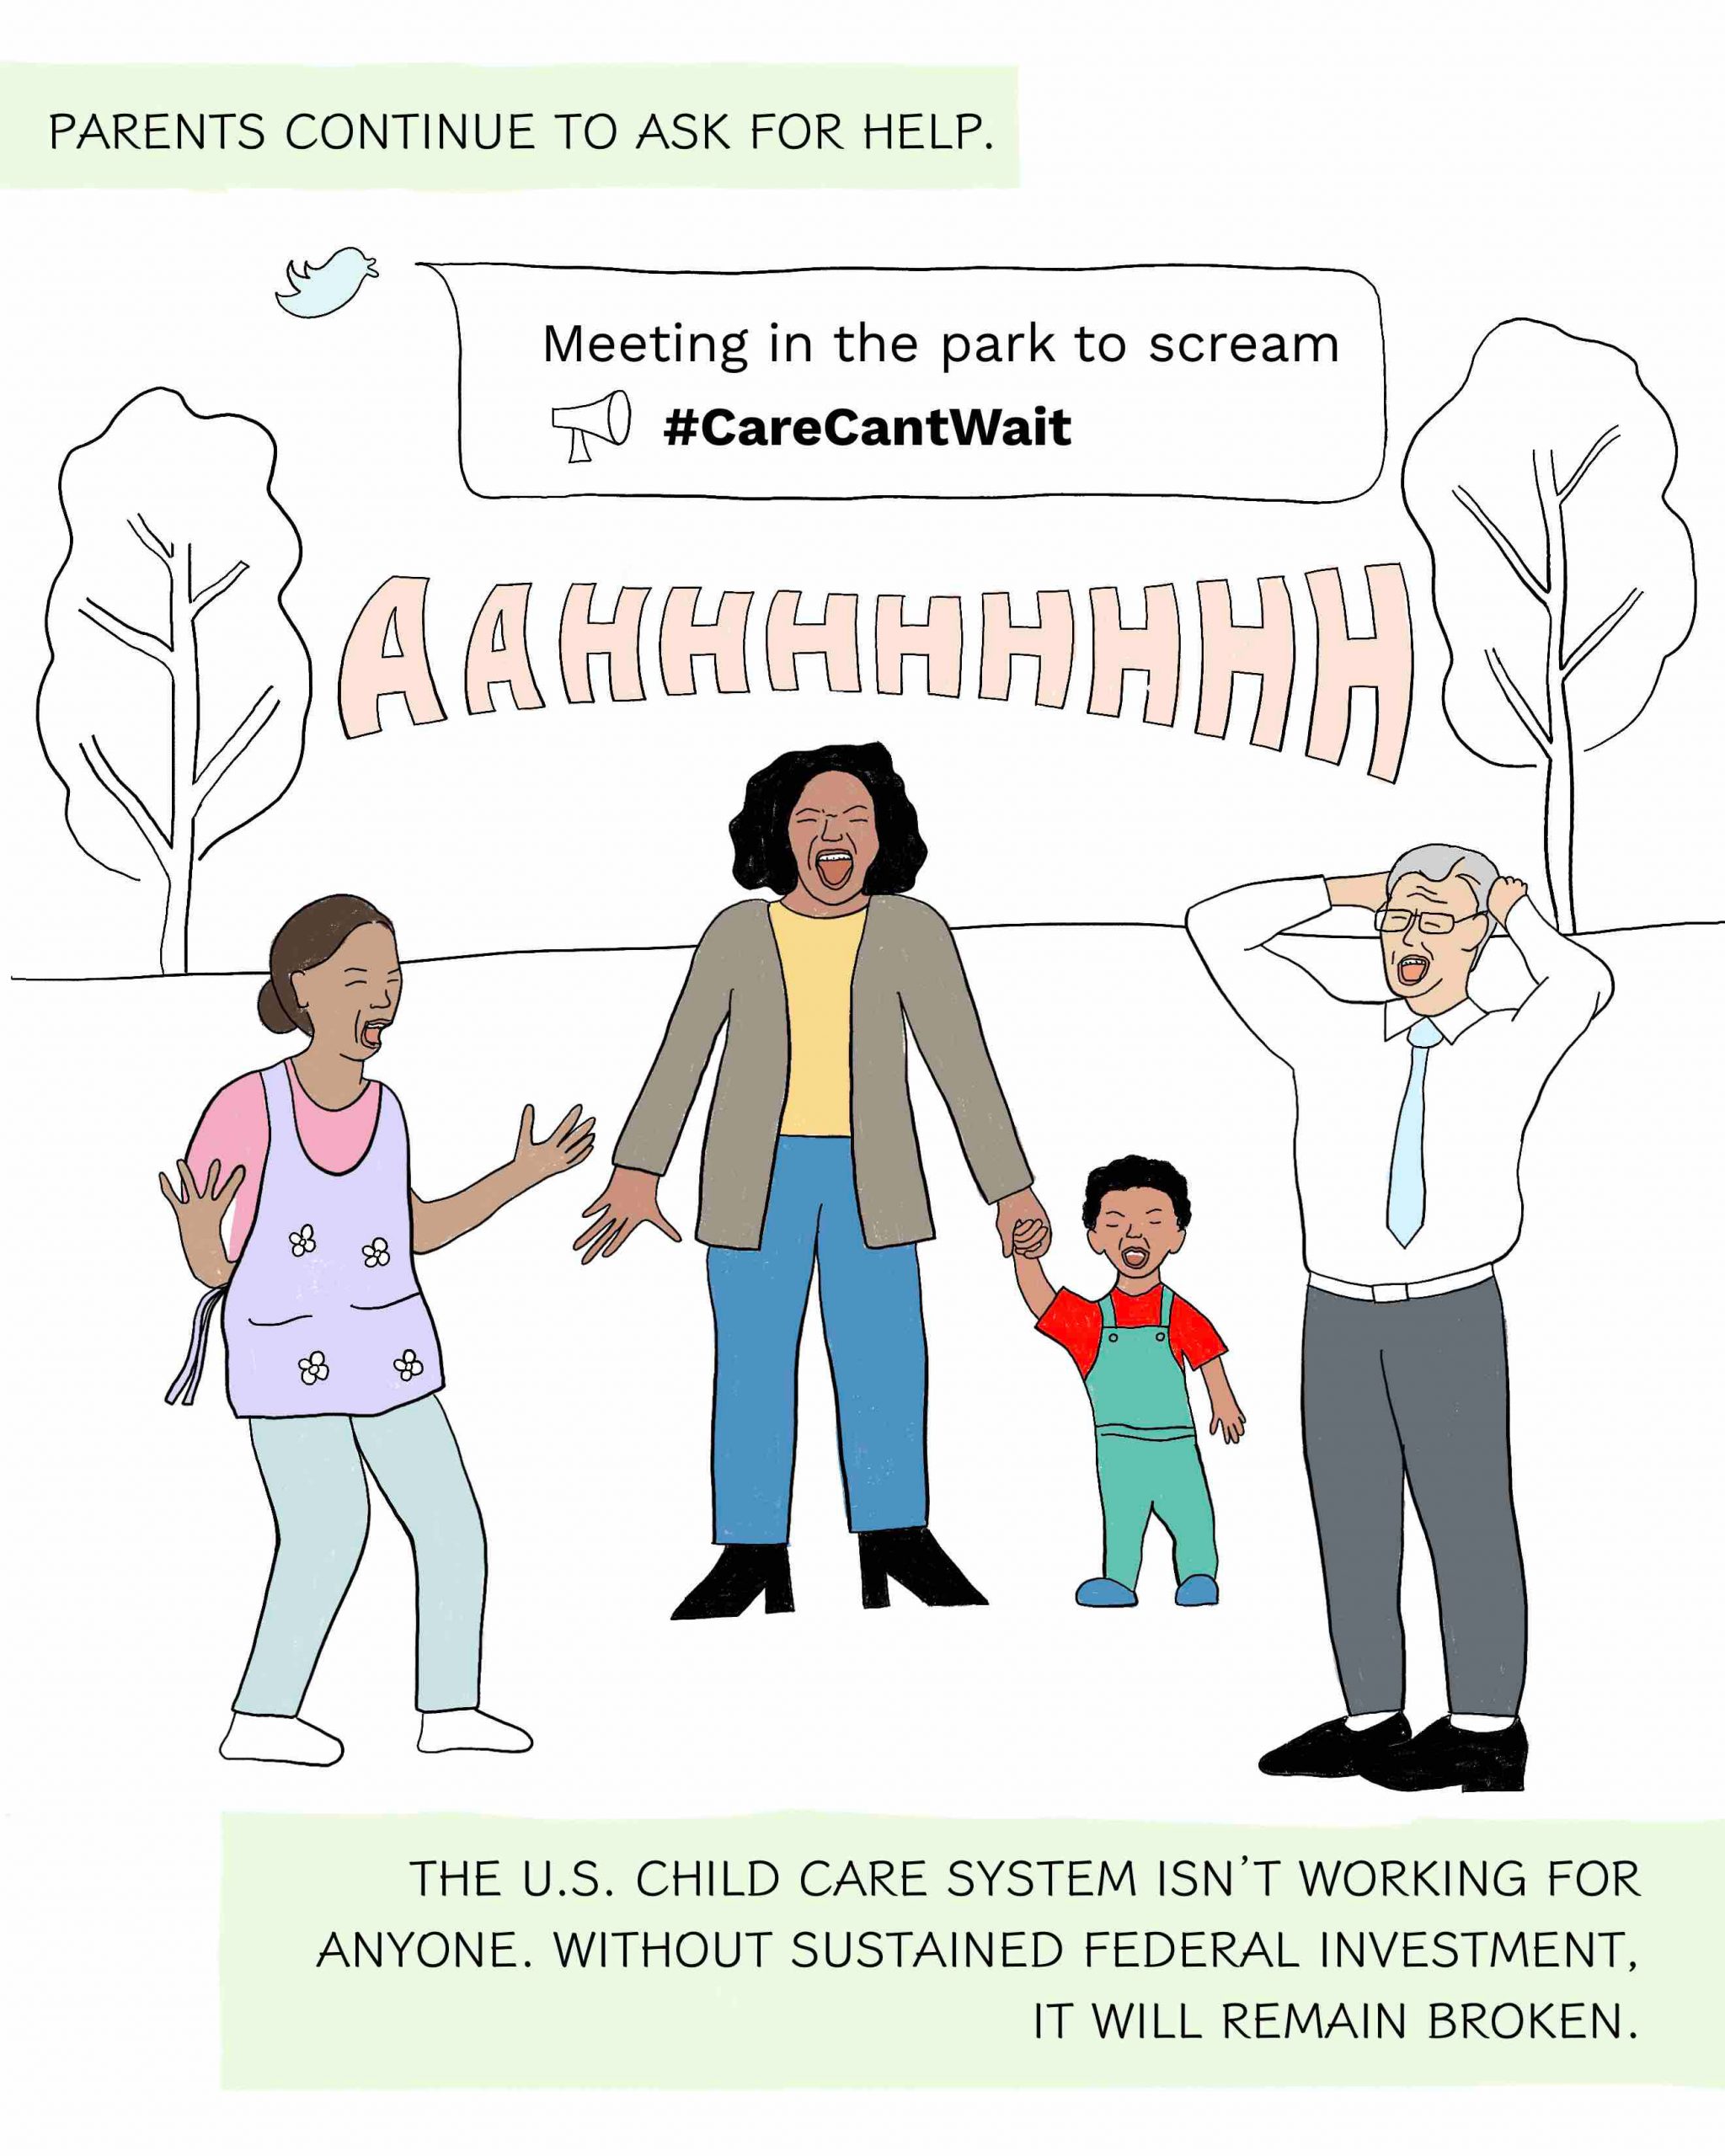 PARENTS CONTINUE TO ASK FOR HELP THE U.S. CHILD CARE SYSTEM ISN’T WORKING FOR ANYONE. WITHOUT SUSTAINED FEDERAL INVESTMENT, IT WILL REMAIN BROKEN. A drawing of parents screaming at a meeting in a park. 